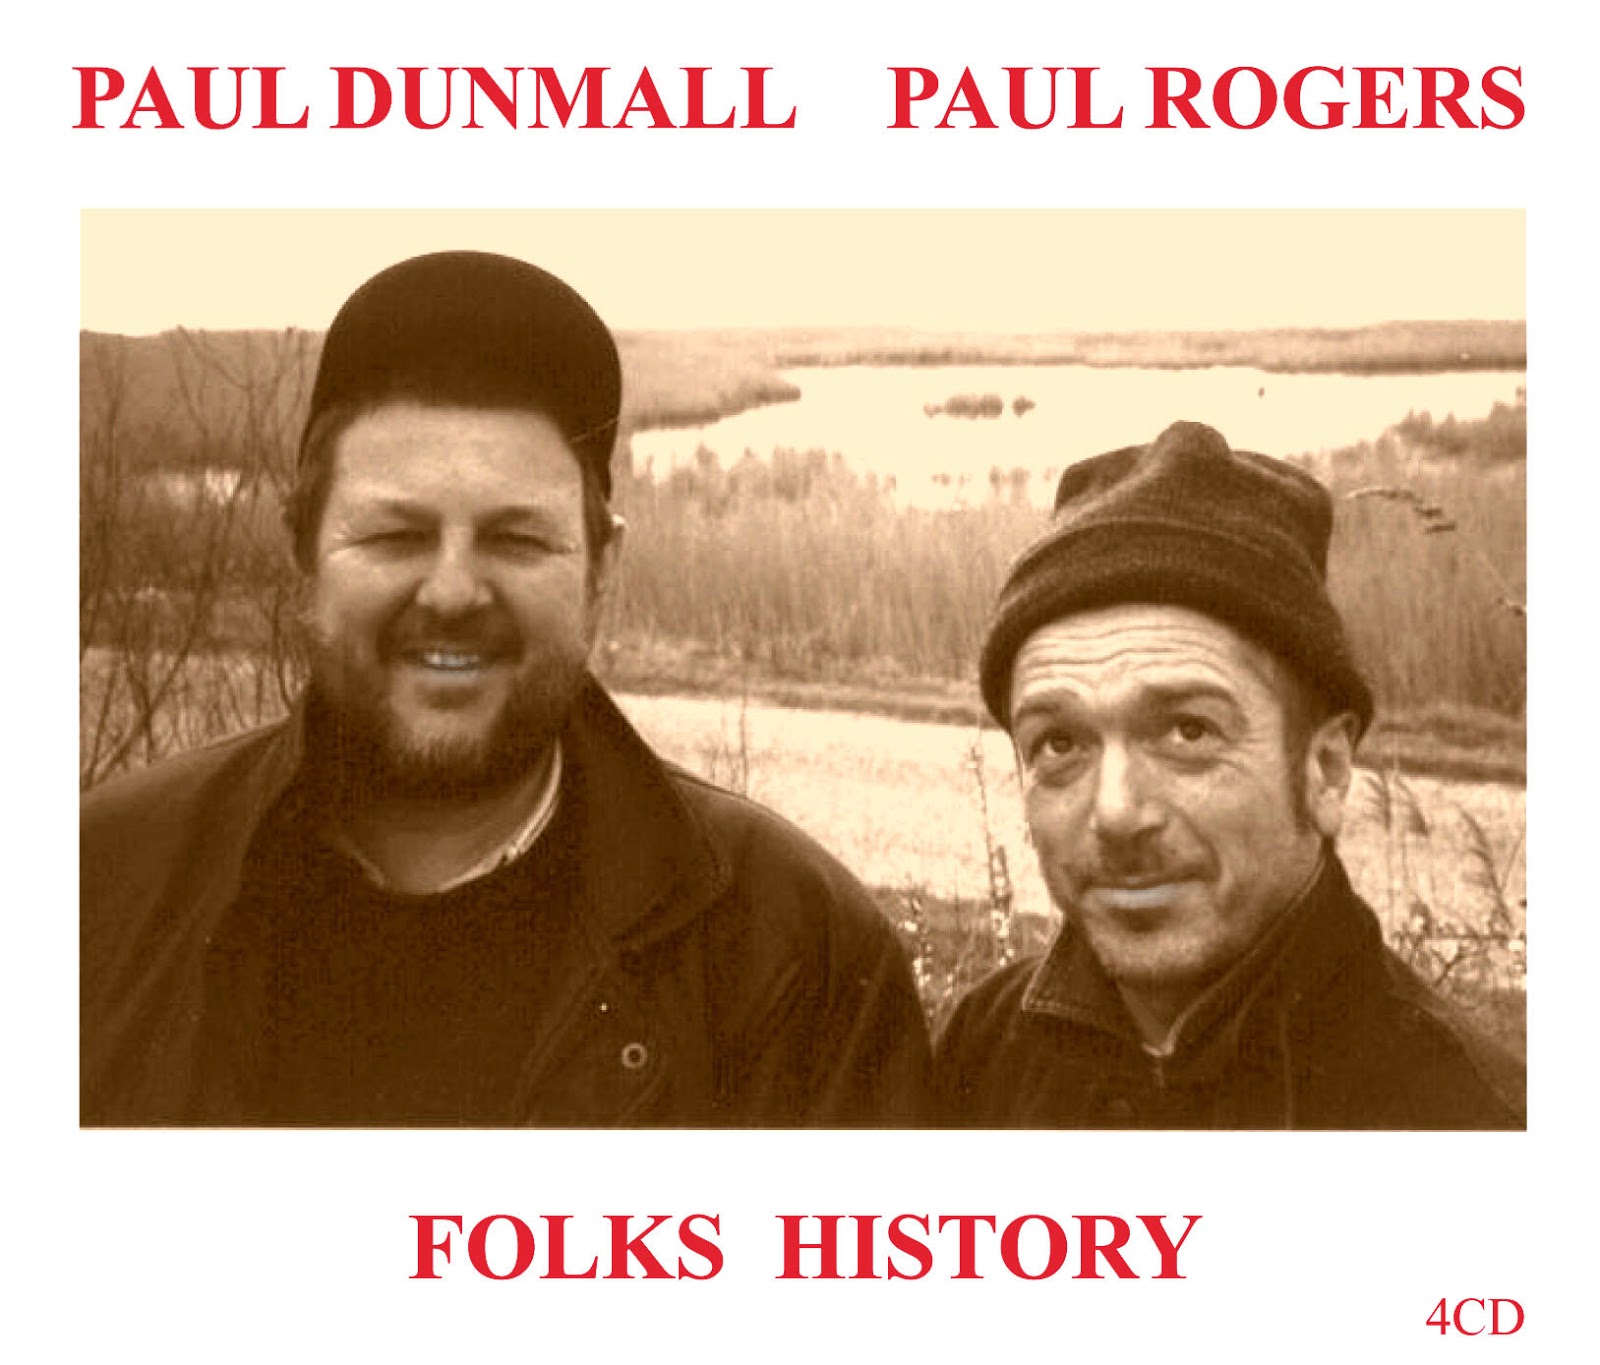 PAUL DUNMALL - Folks History cover 